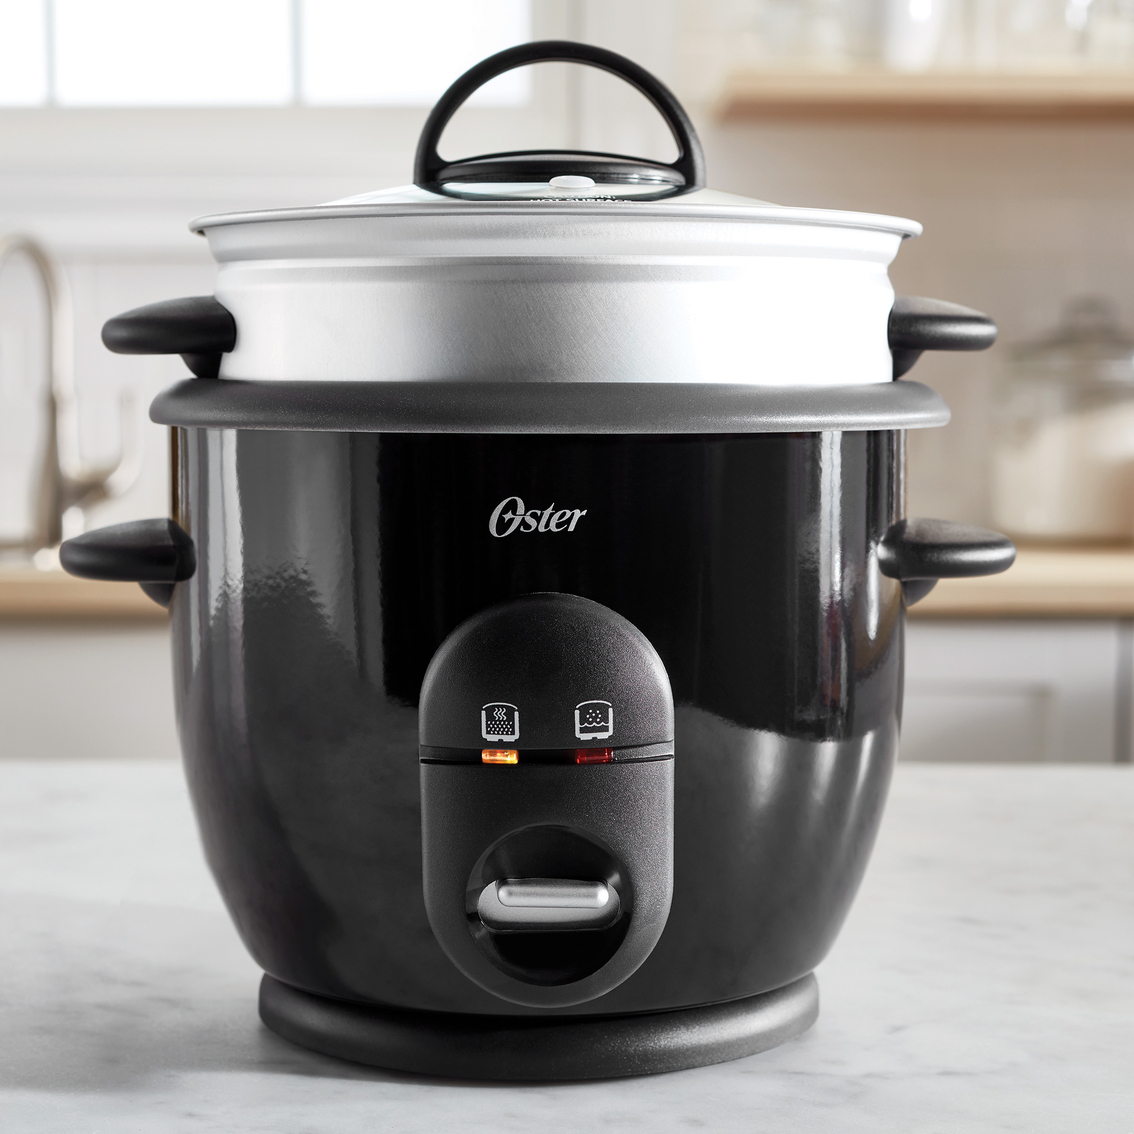 Oster Diamondforce Nonstick 6 Cup Electric Rice Cooker